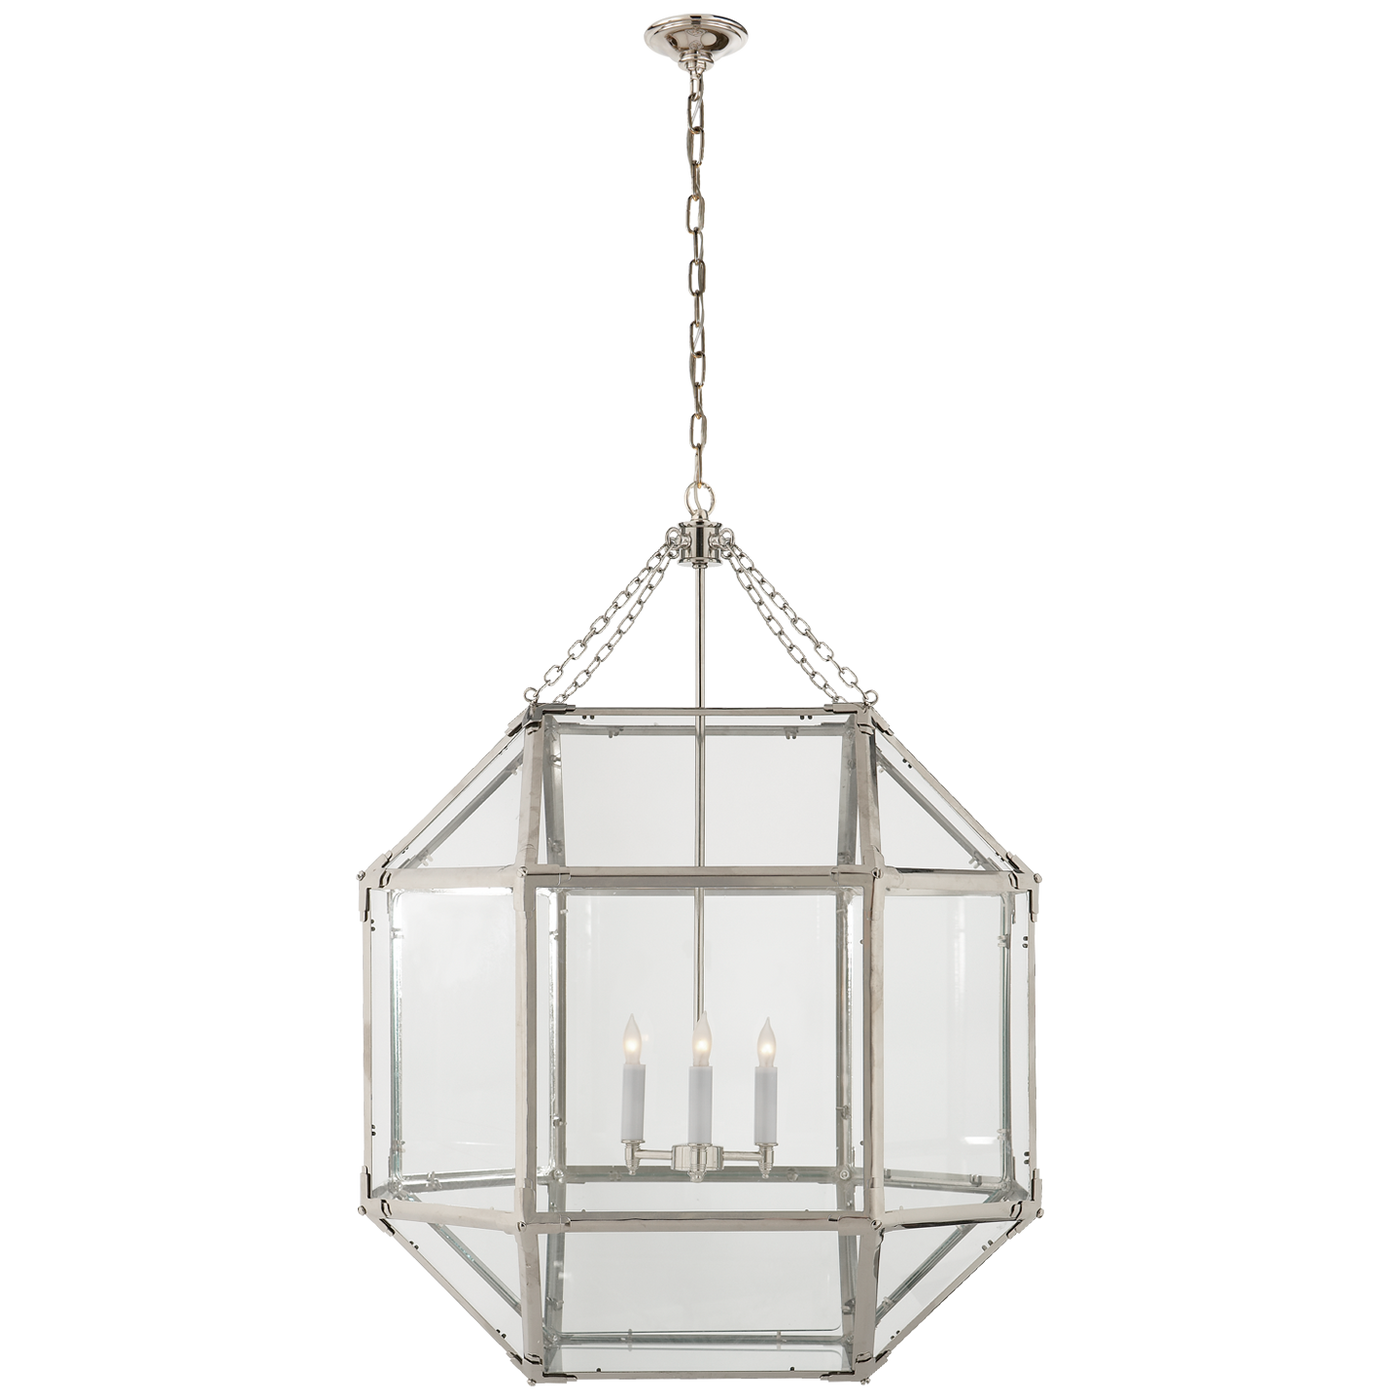 LANTERN PANED LARGE (Available in 2 Finishes)